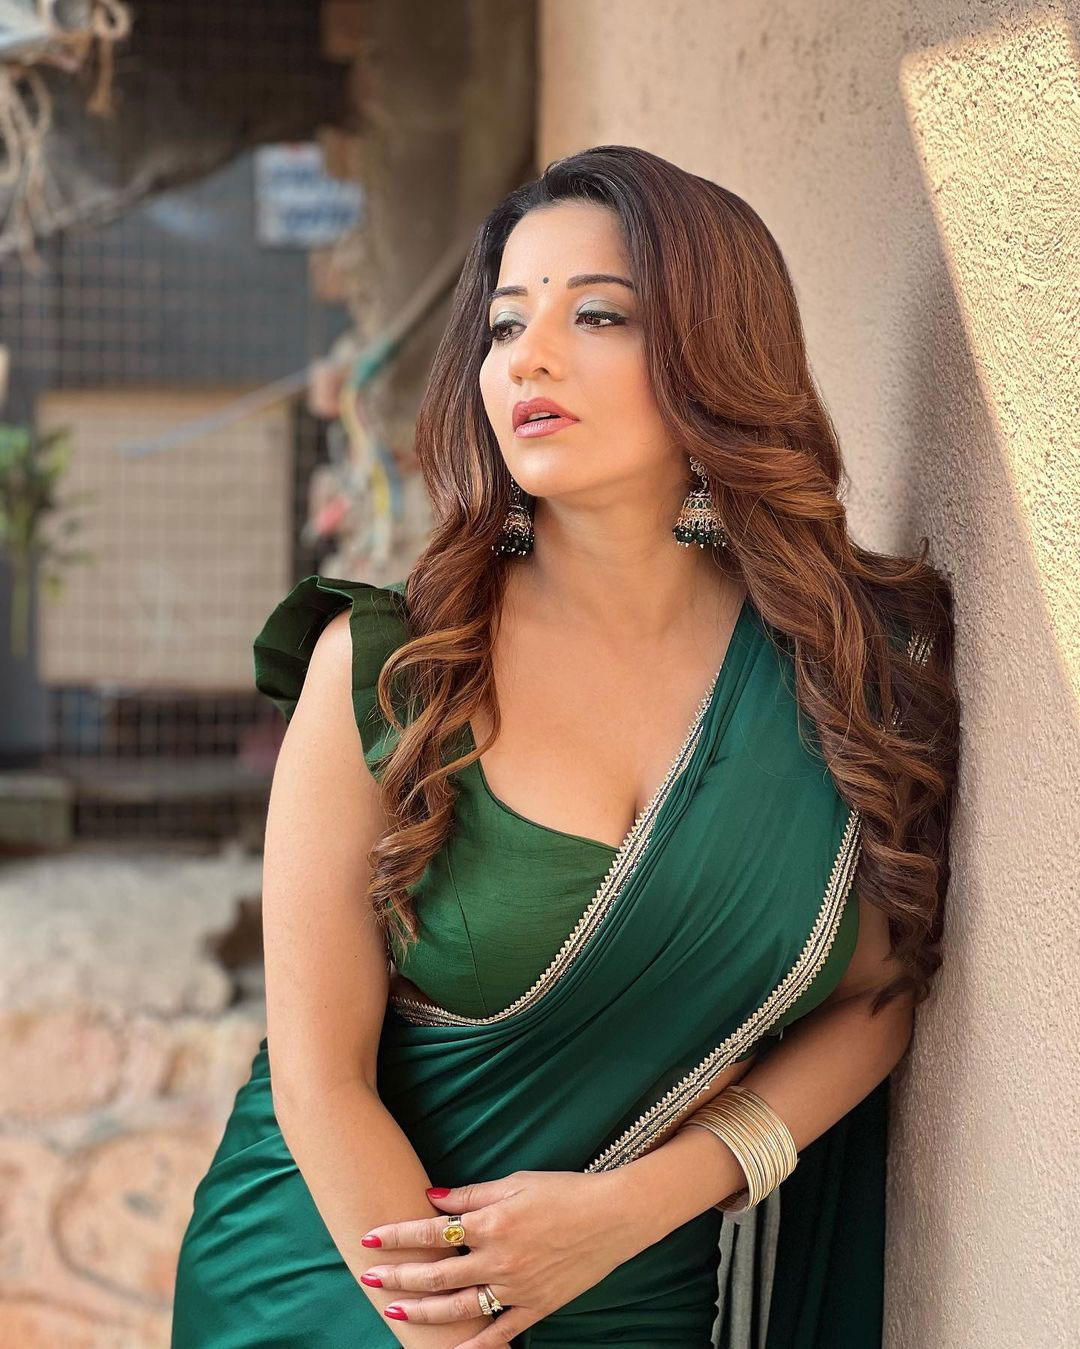 Bhojpuri actress Monalisa flaunts breast cleavage in bold photos amid pregnancy announcement 